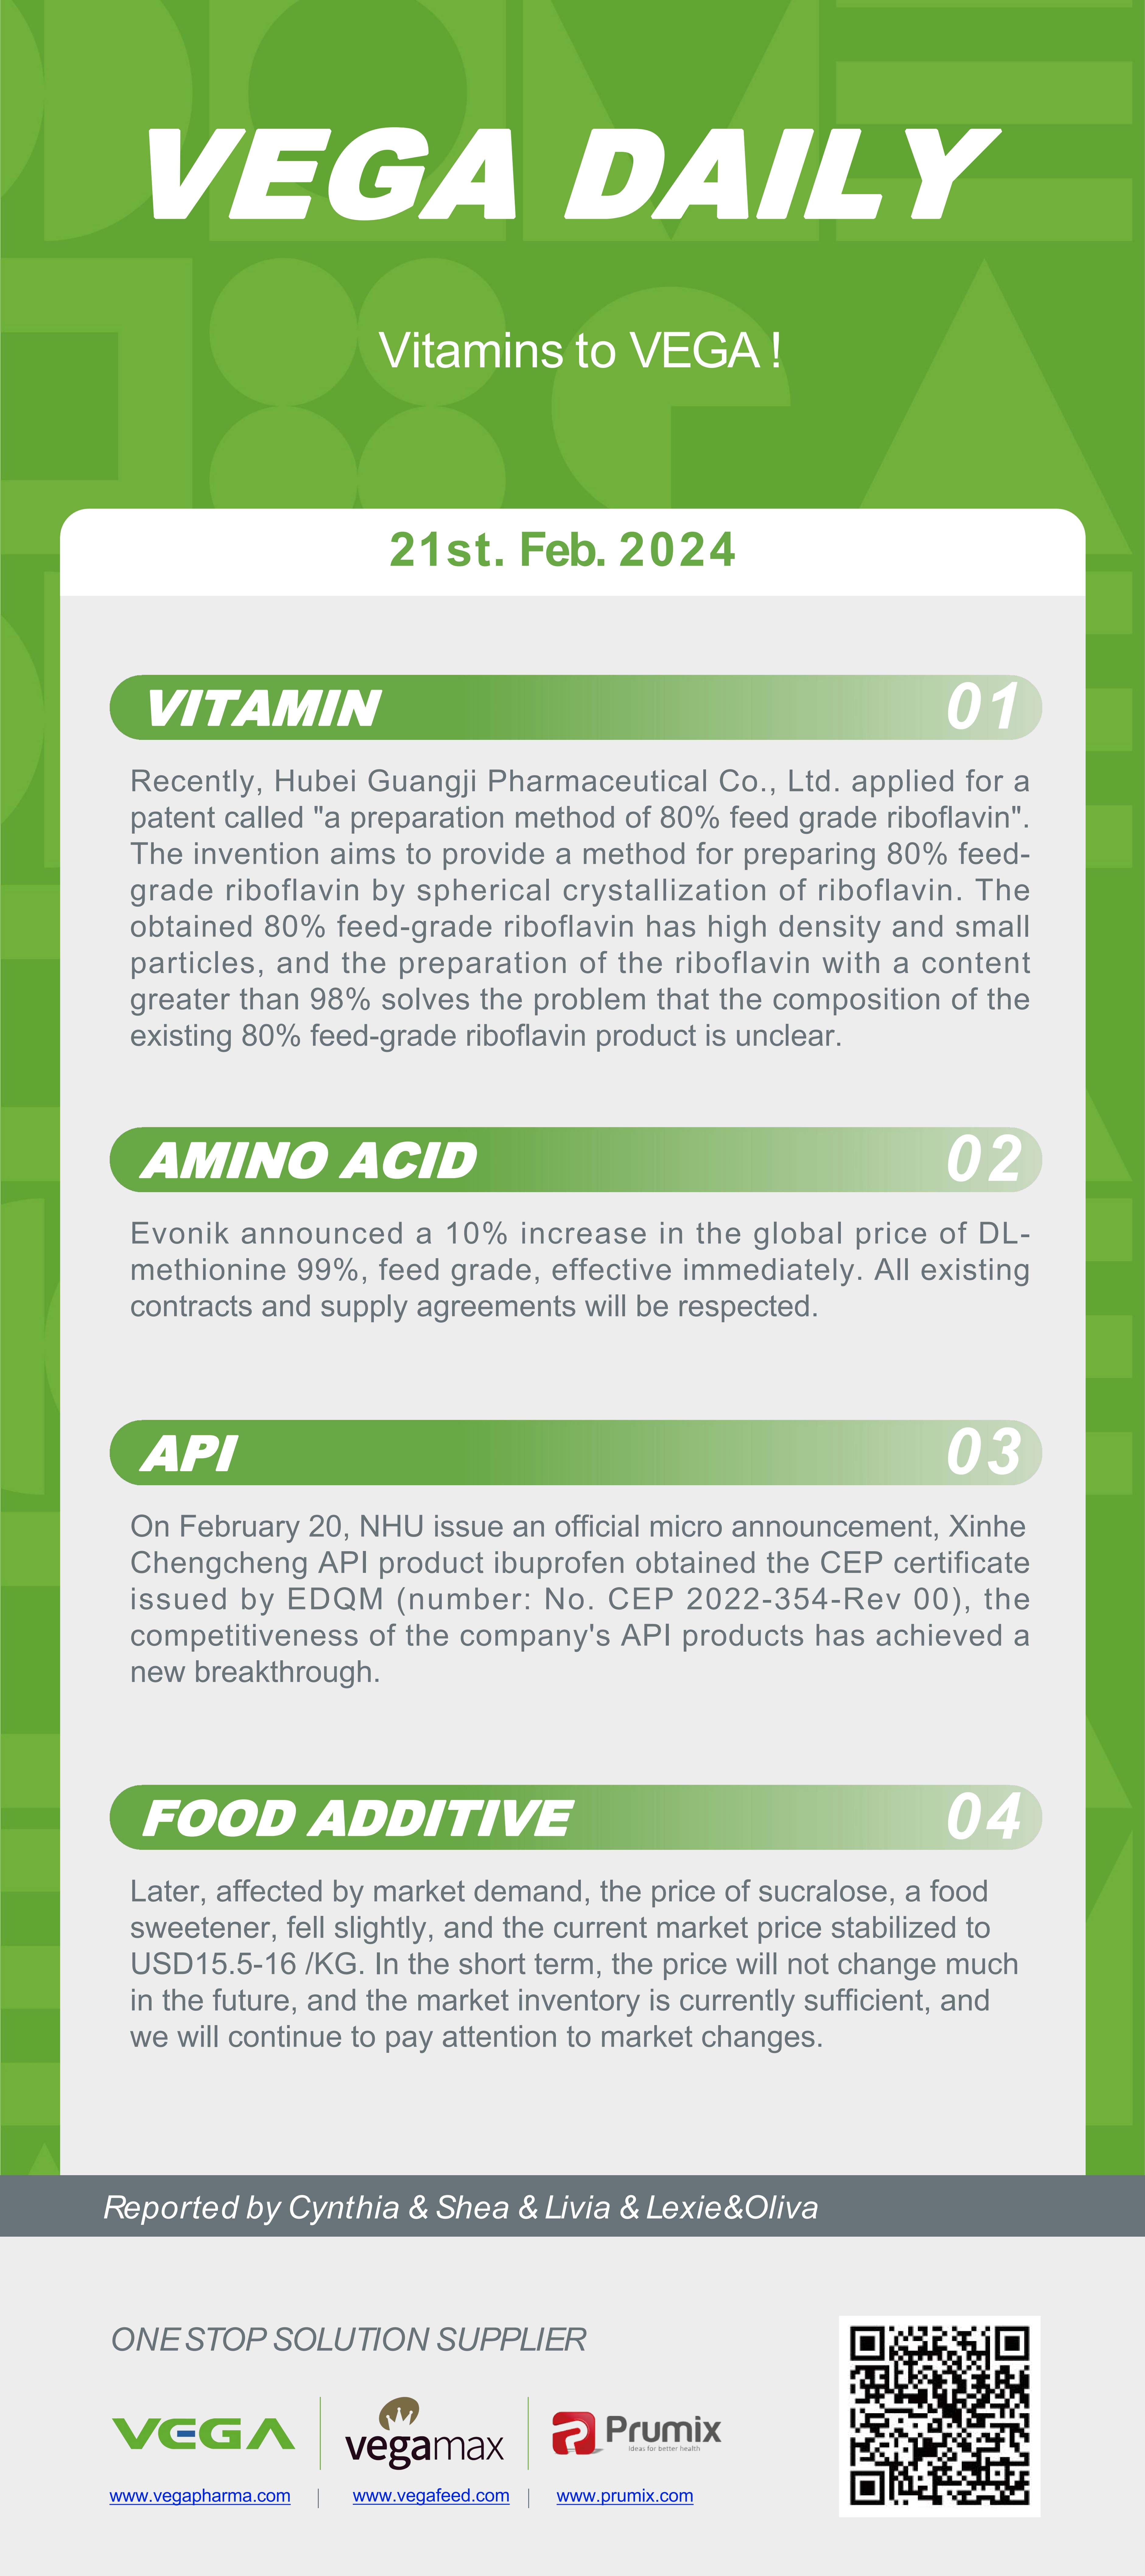 Vega Daily Dated on Fab 21st 2024 Vitamin Amino Acid APl Food Additives.png